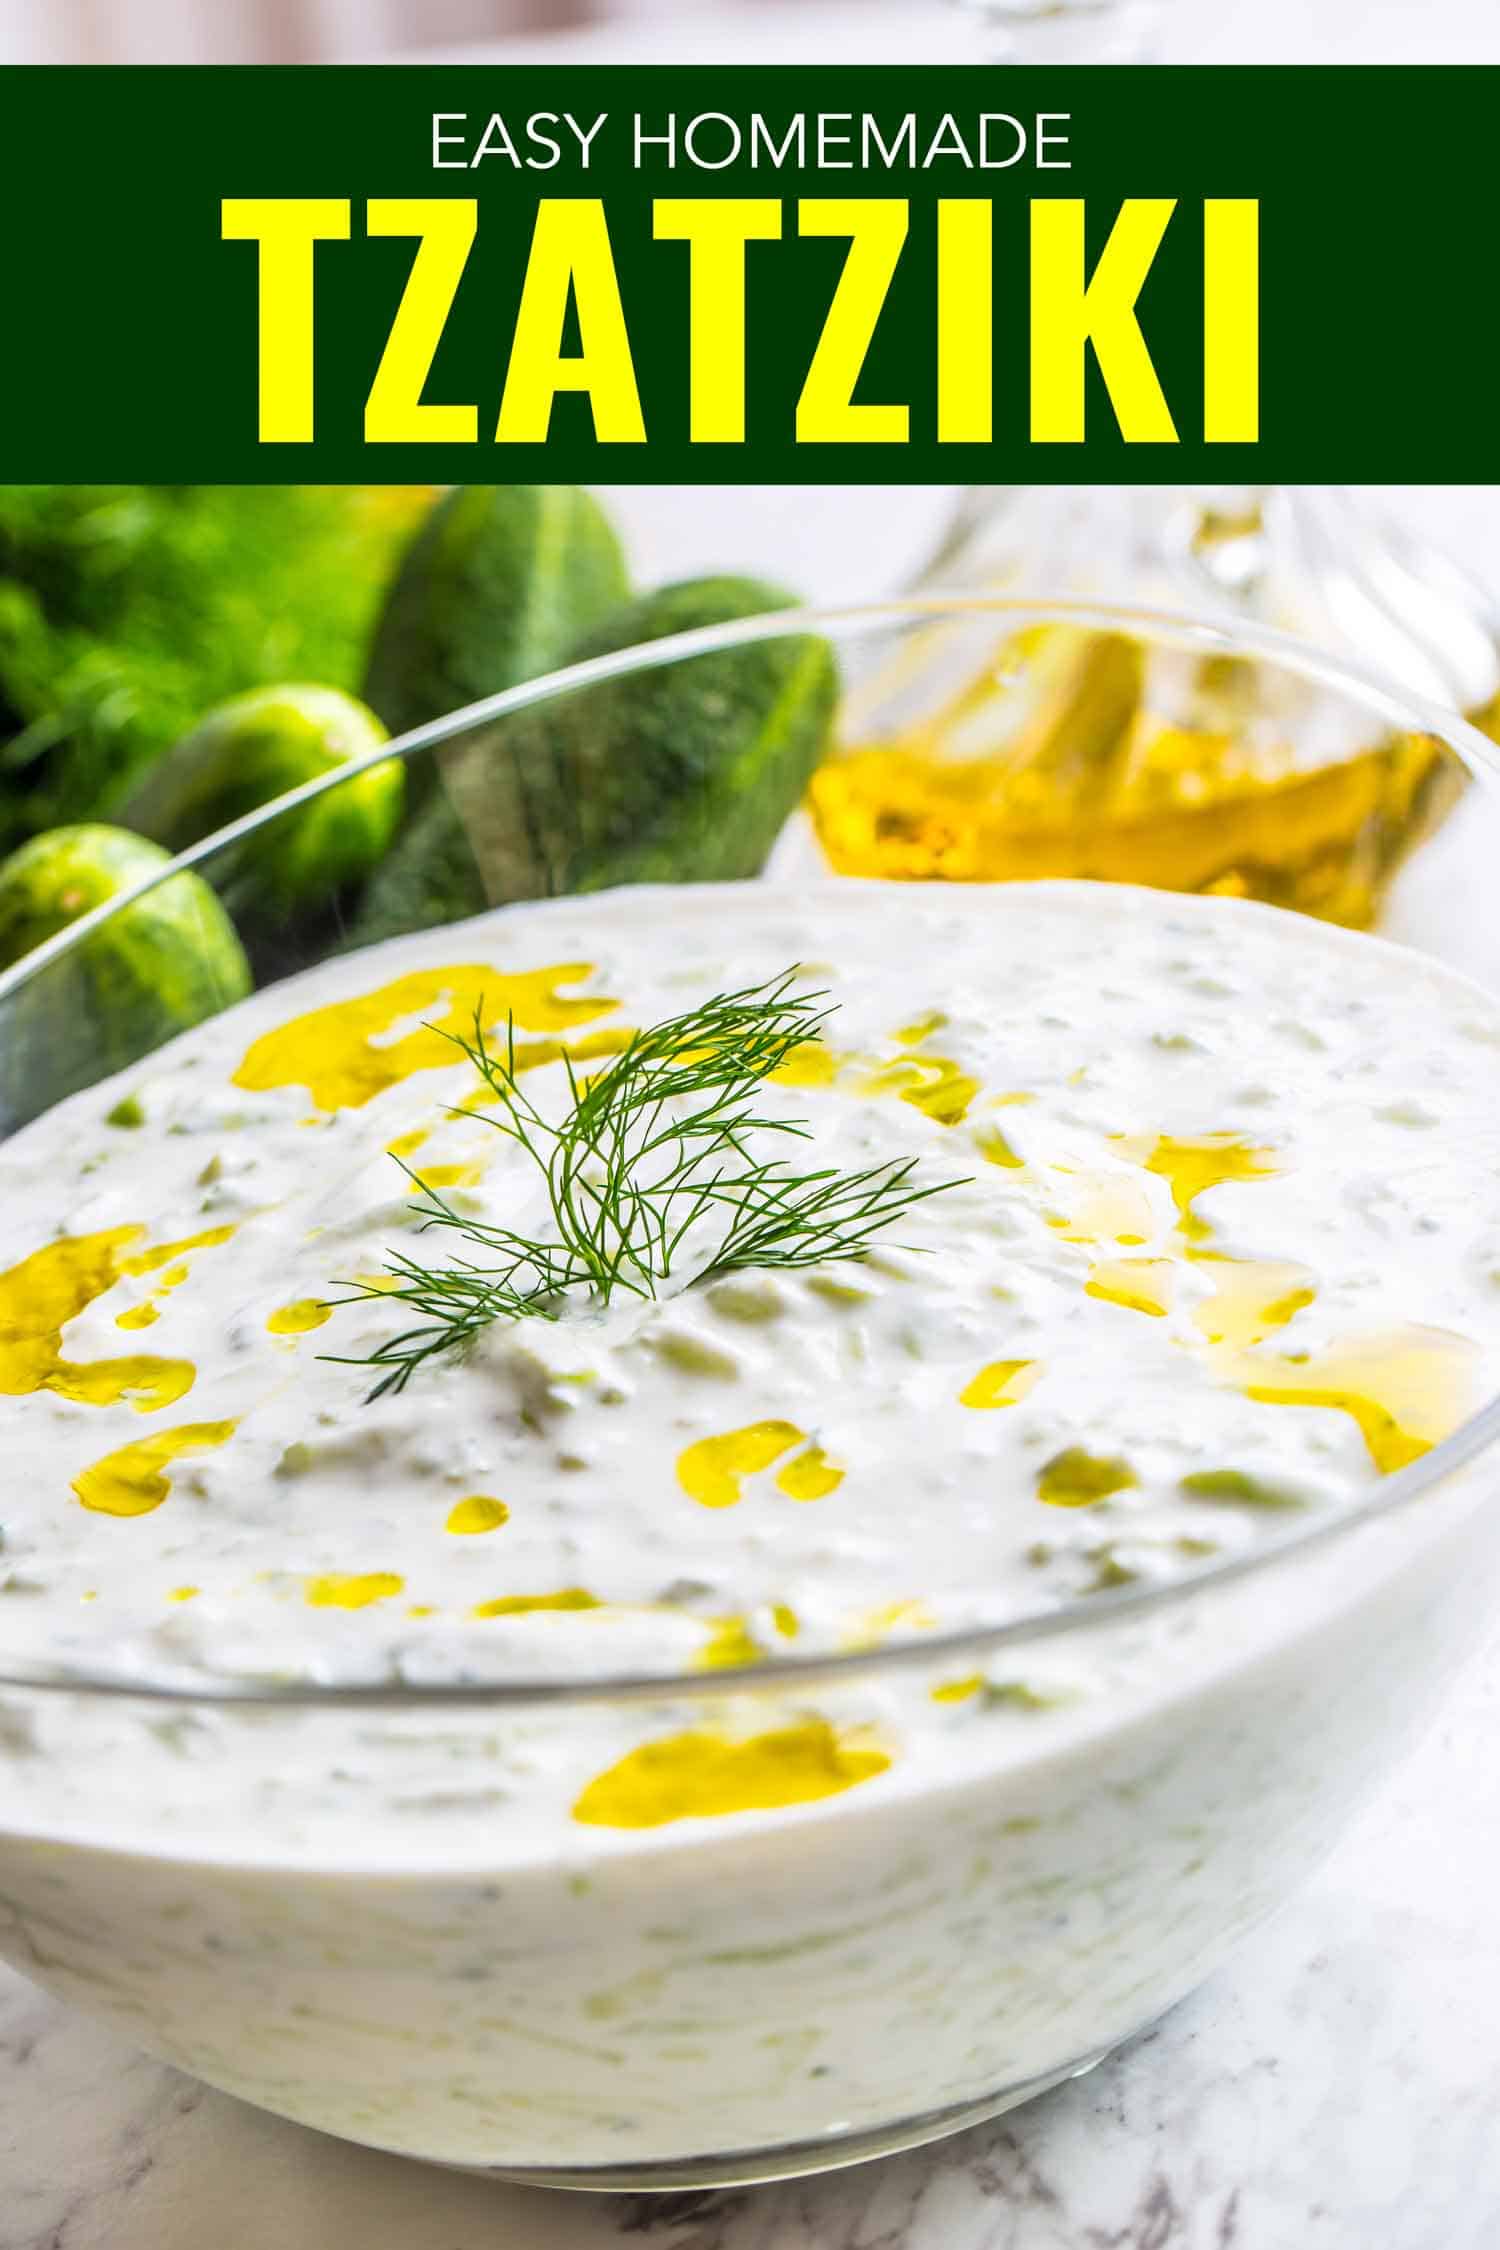 This healthy greek tzatziki recipe using greek yogurt is so easy to make you'll wonder why you ever bought it premade.